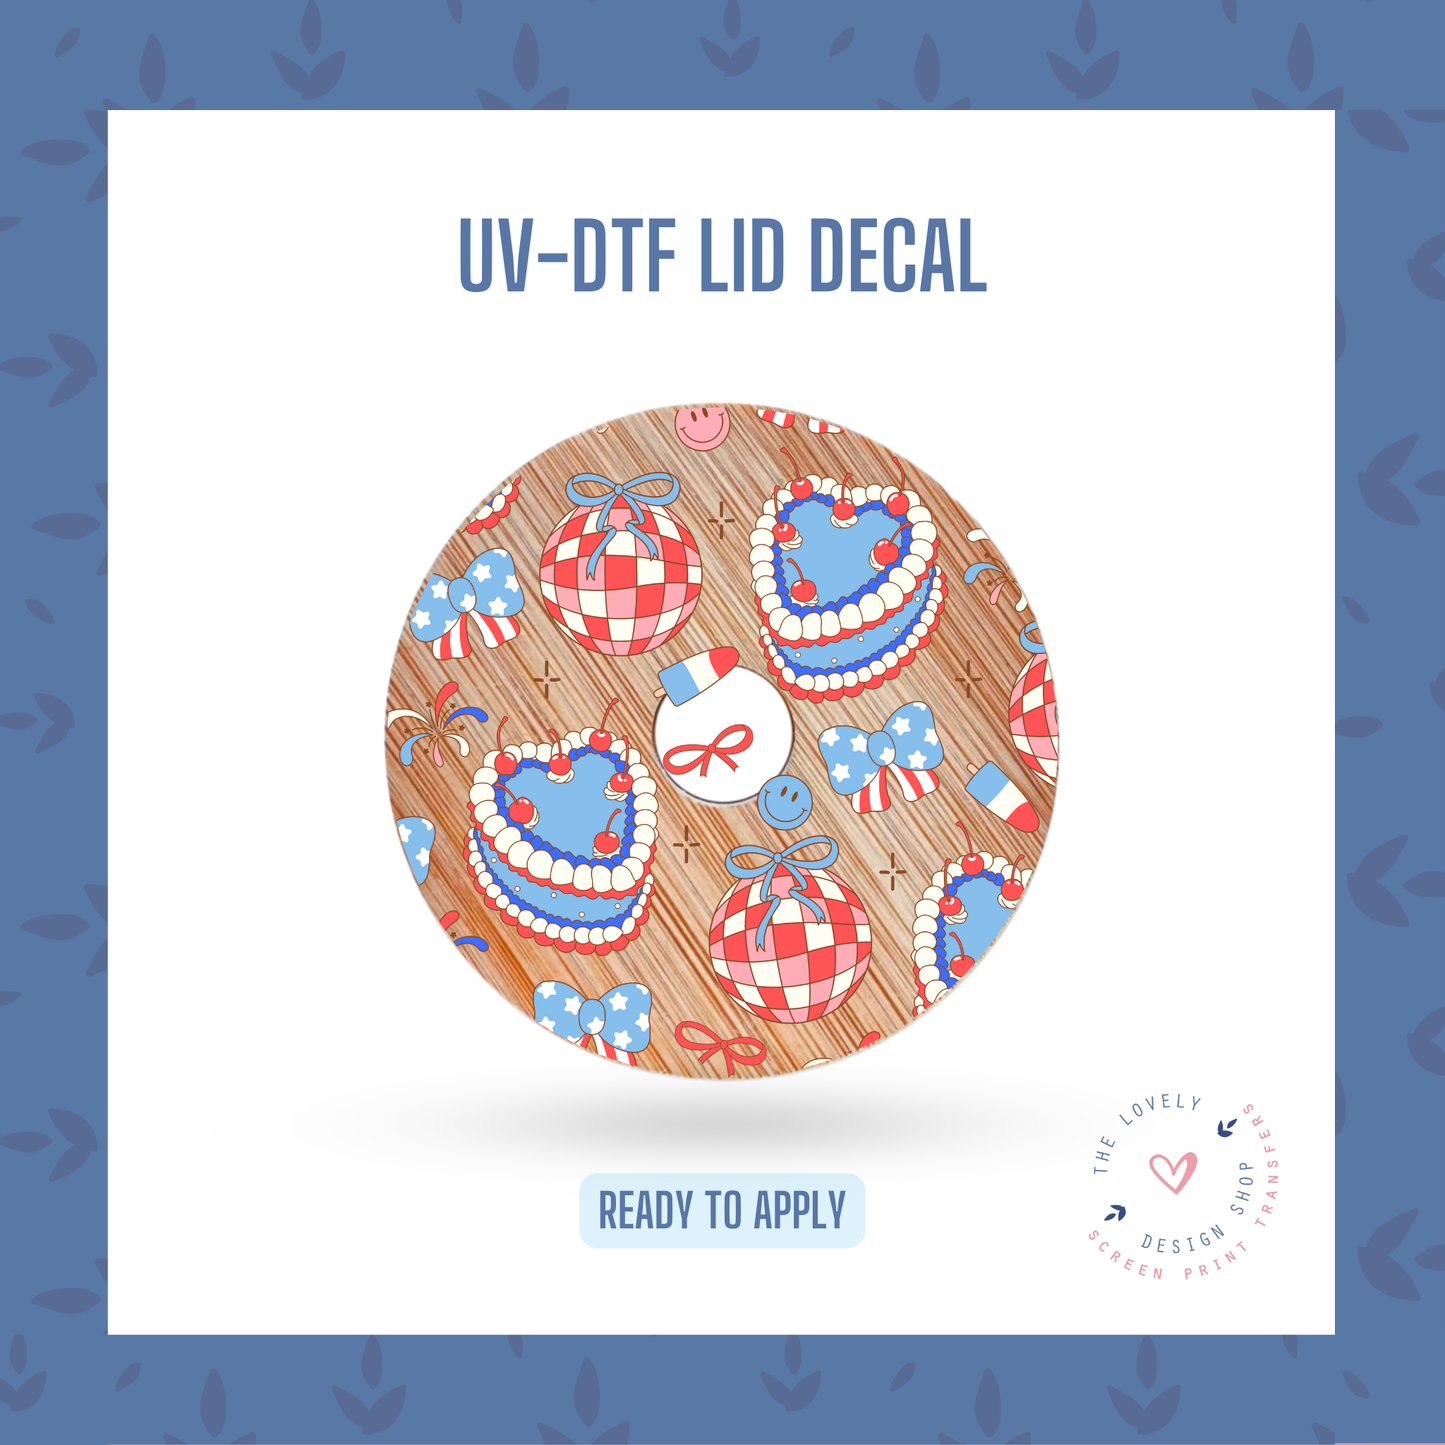 Vintage 4th of July - UV DTF Lid Decal (Ready to Ship) May 28